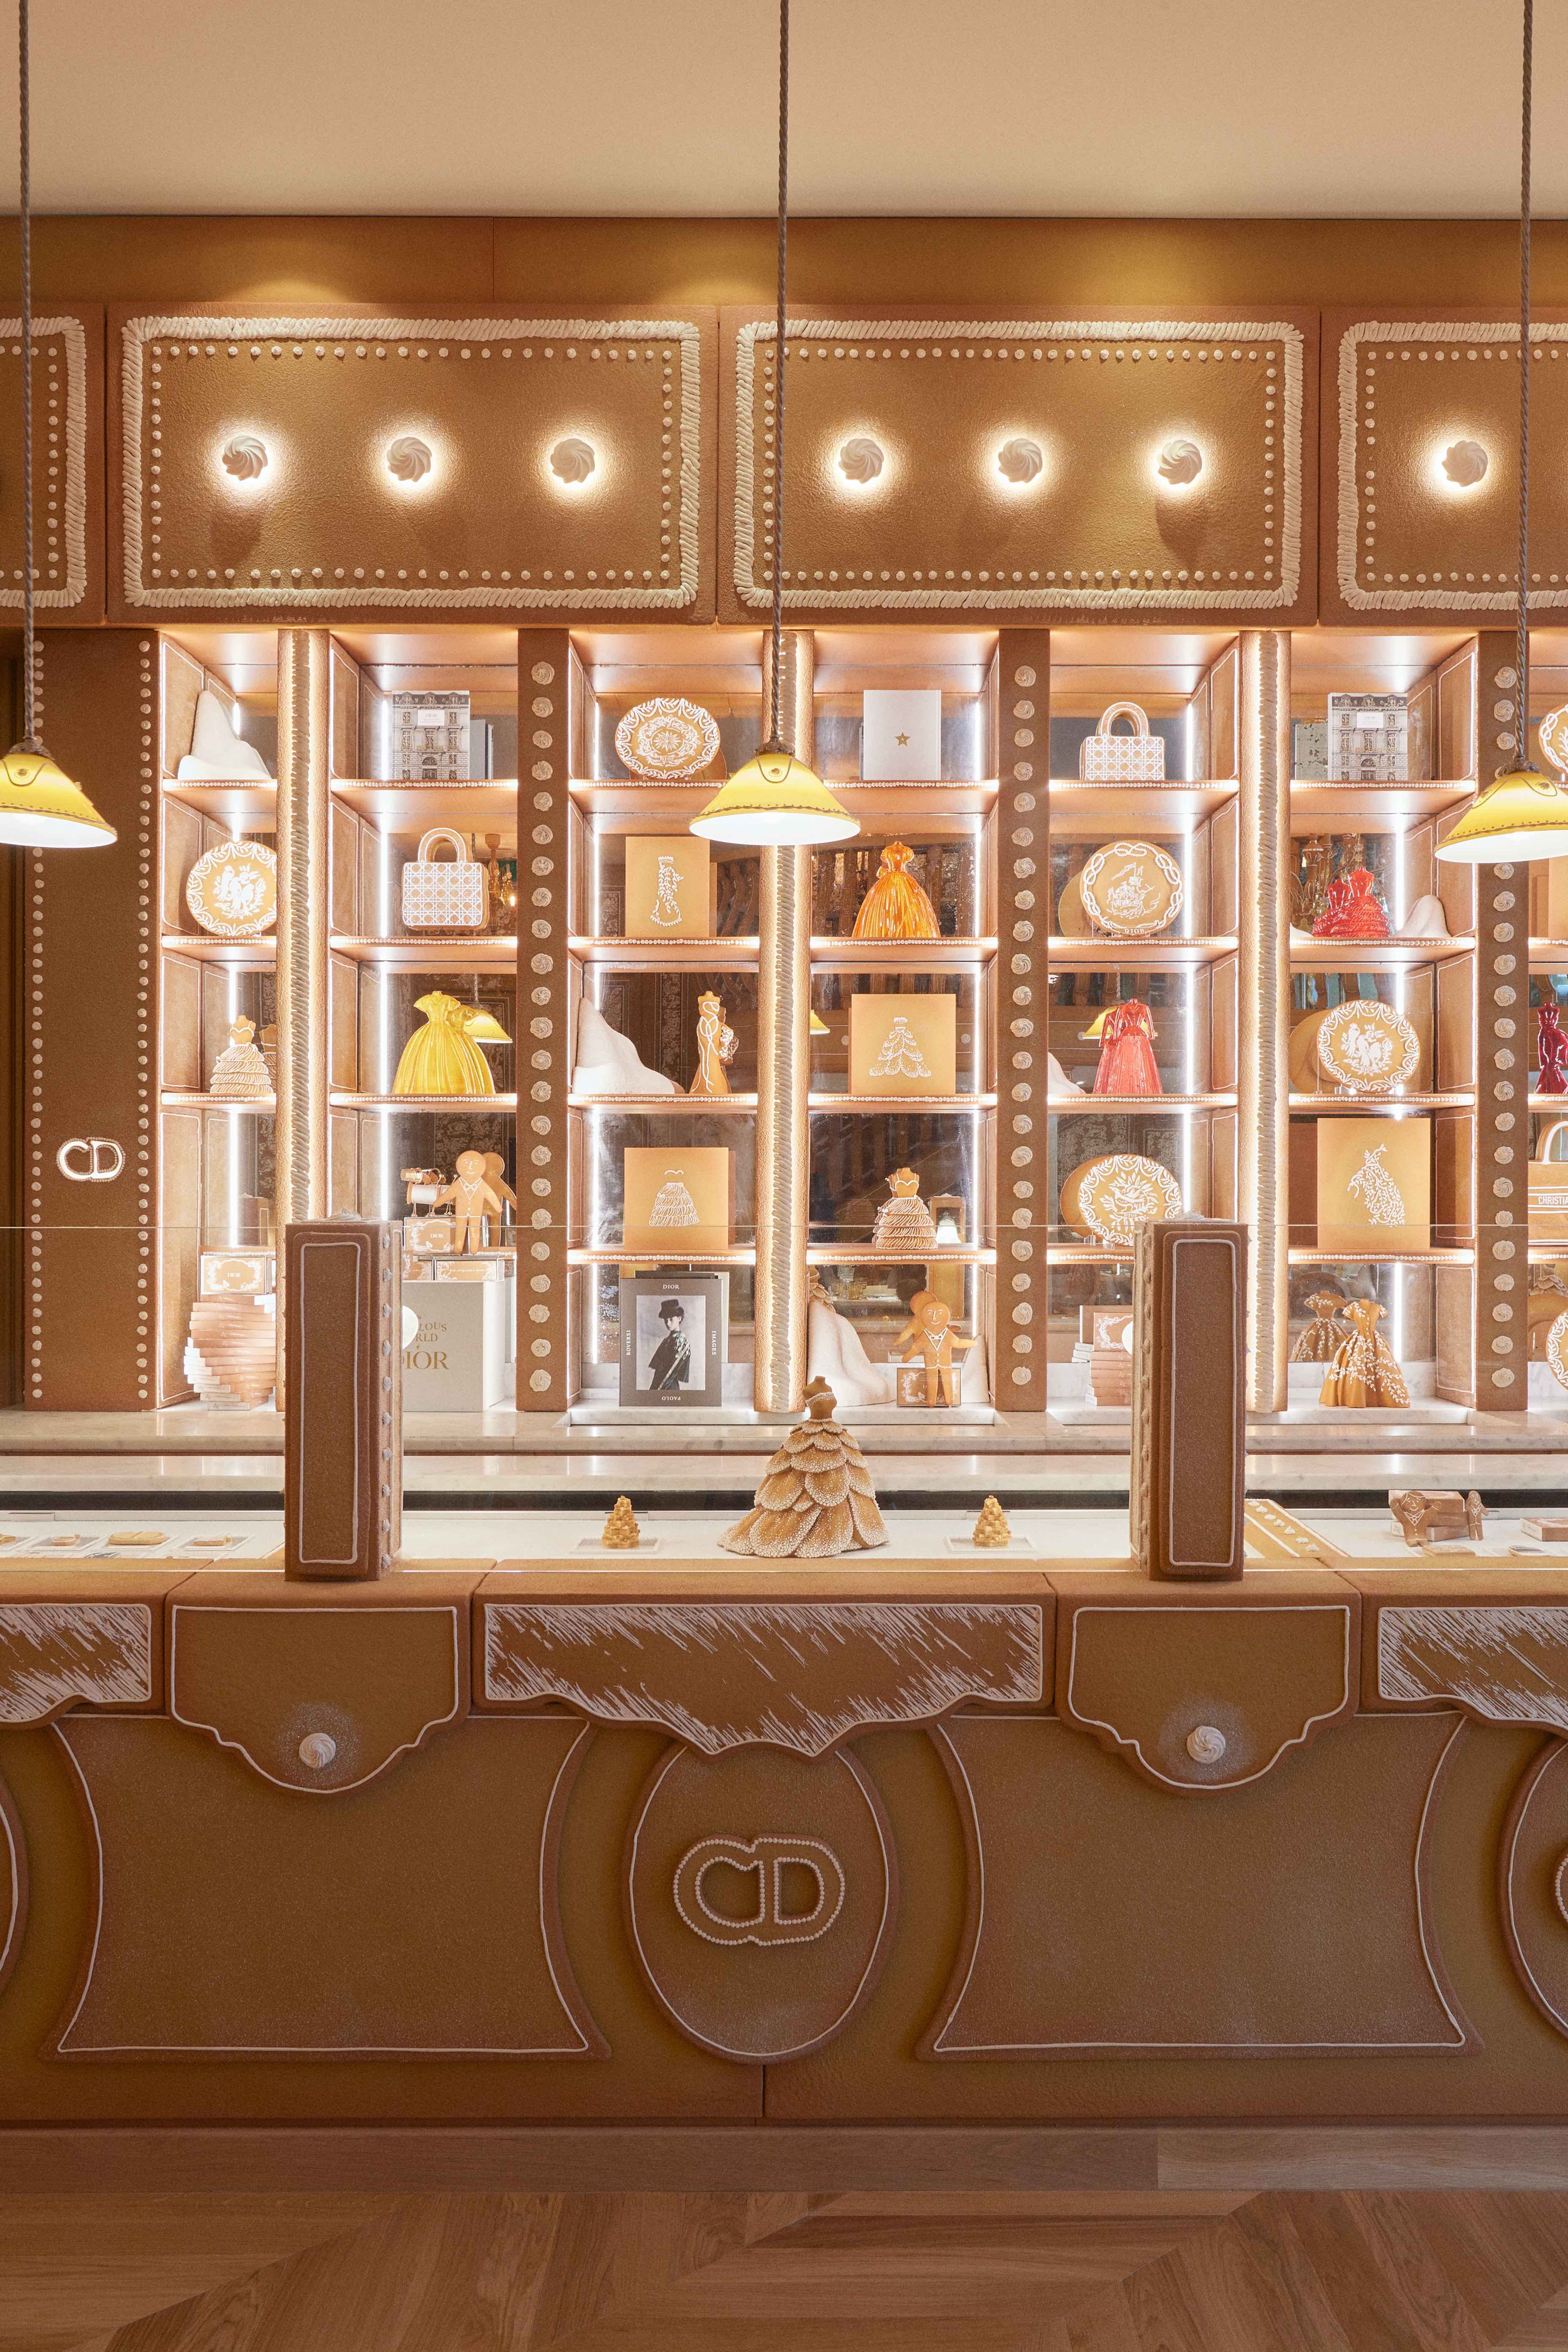 Dior's Holiday Takeover of Harrods is the Ultimate Christmas Fantasy